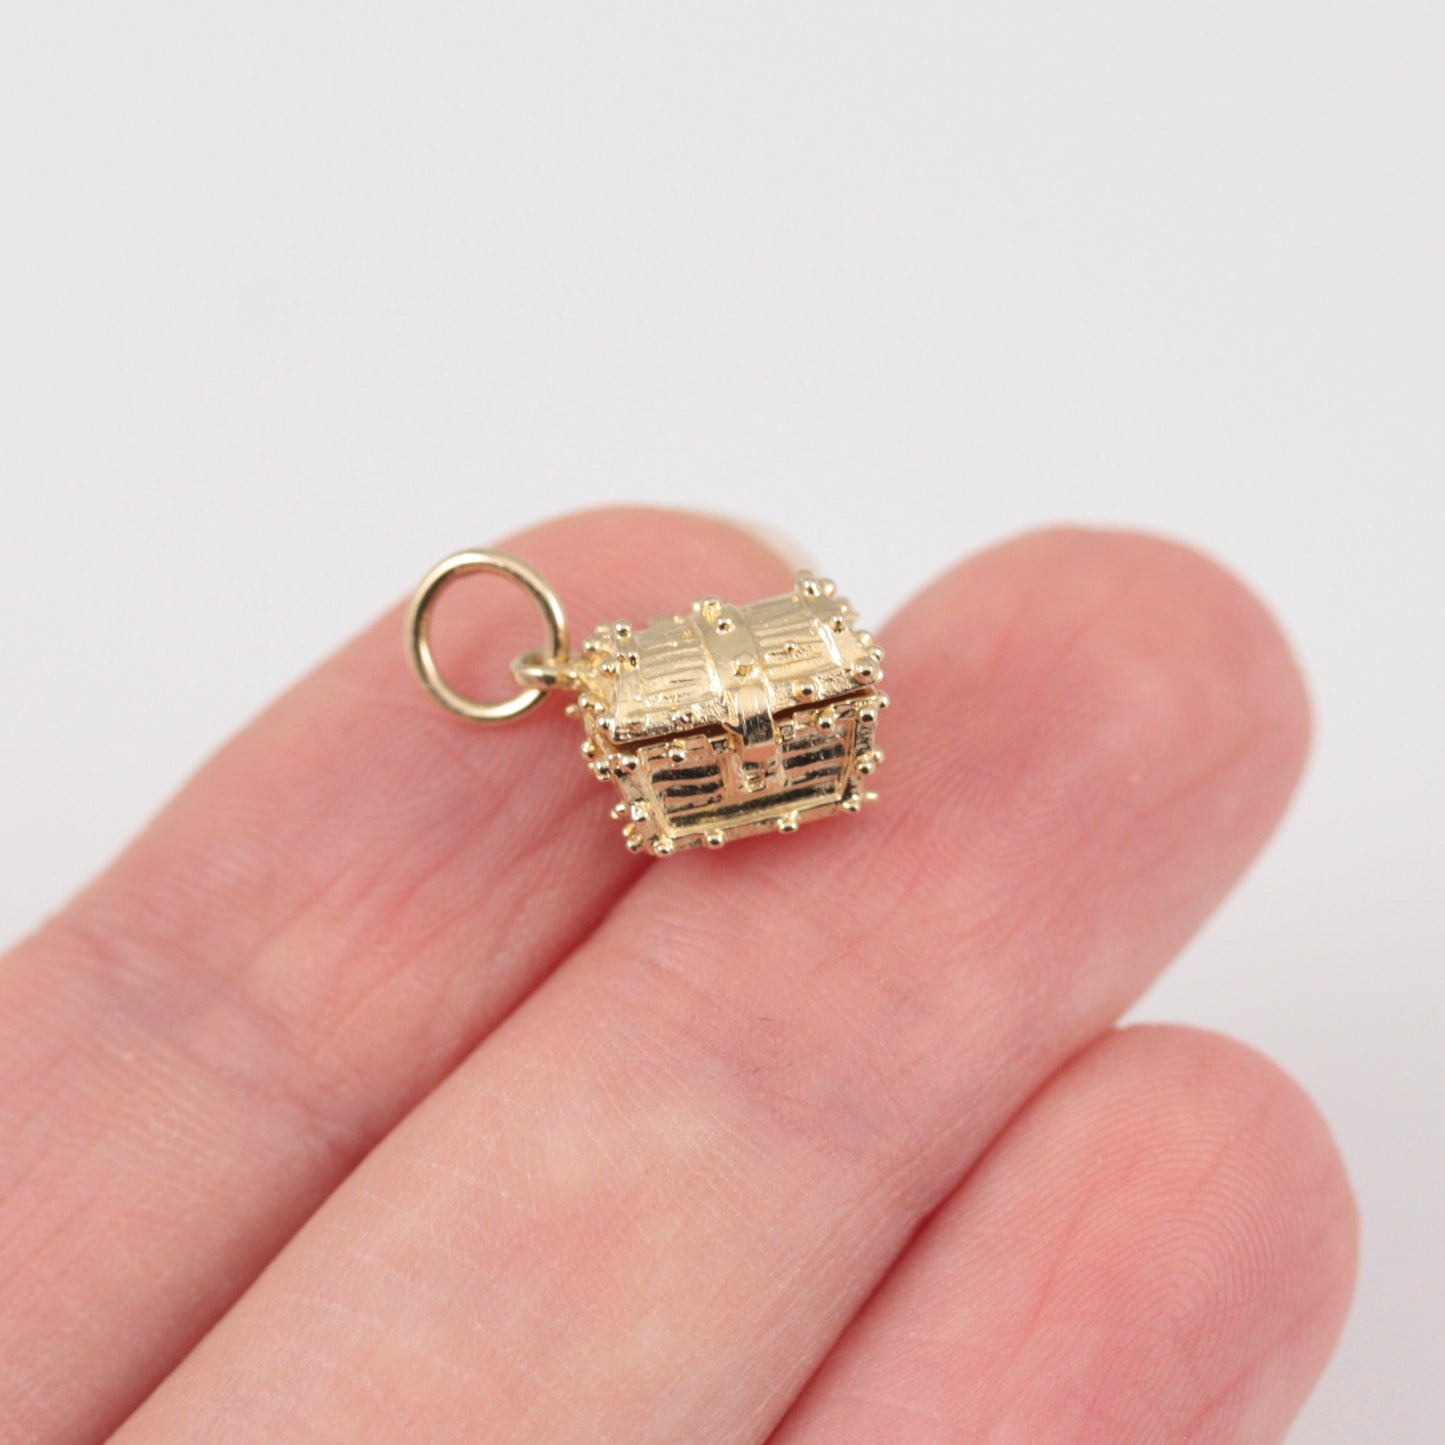 vintage opening treasure chest charm